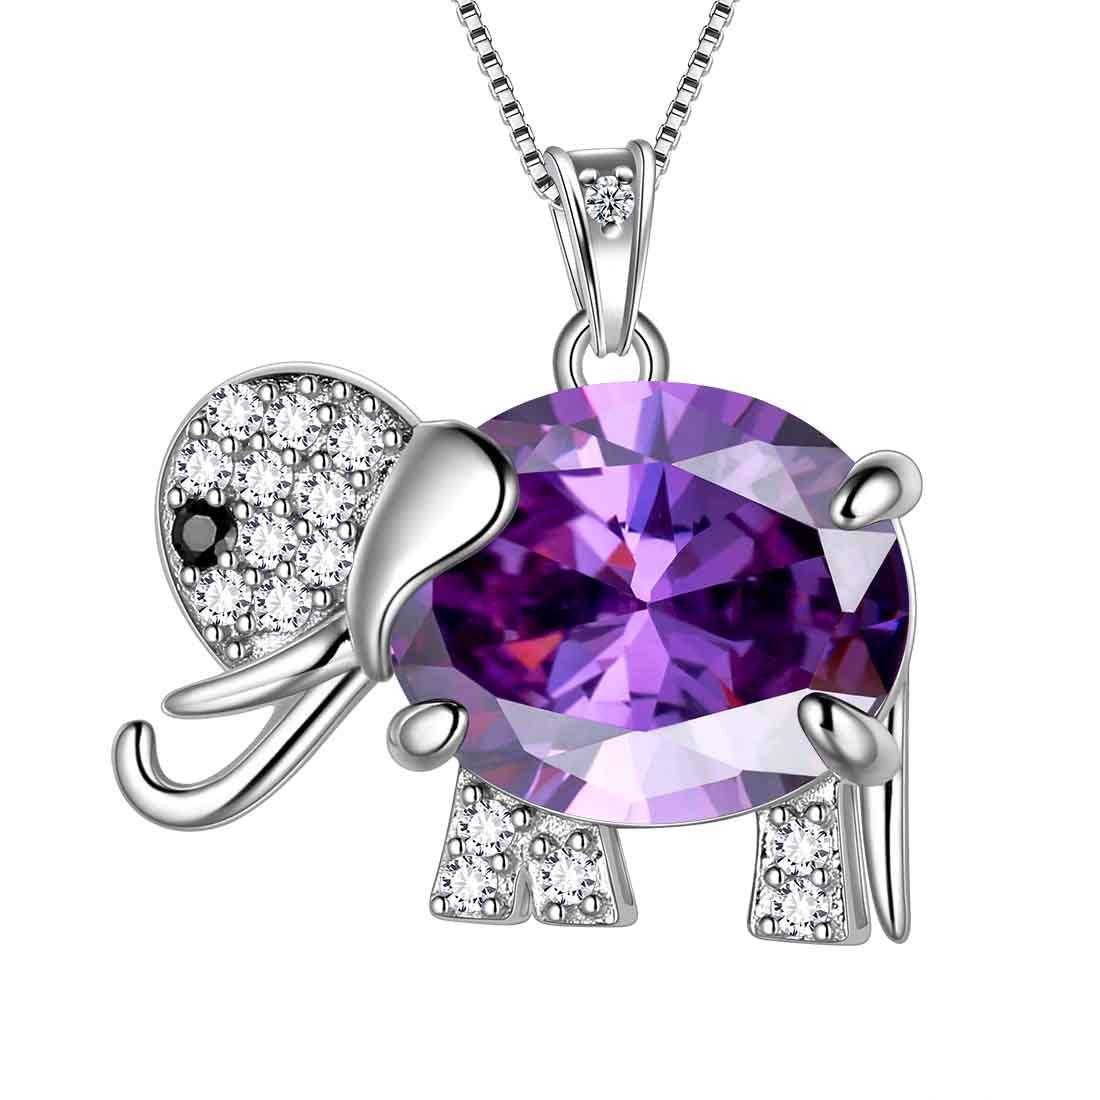 Elephant Necklace Birthstone Pendant Necklace Women Jewelry Gifts 925 Sterling Silver - Aurora Tears